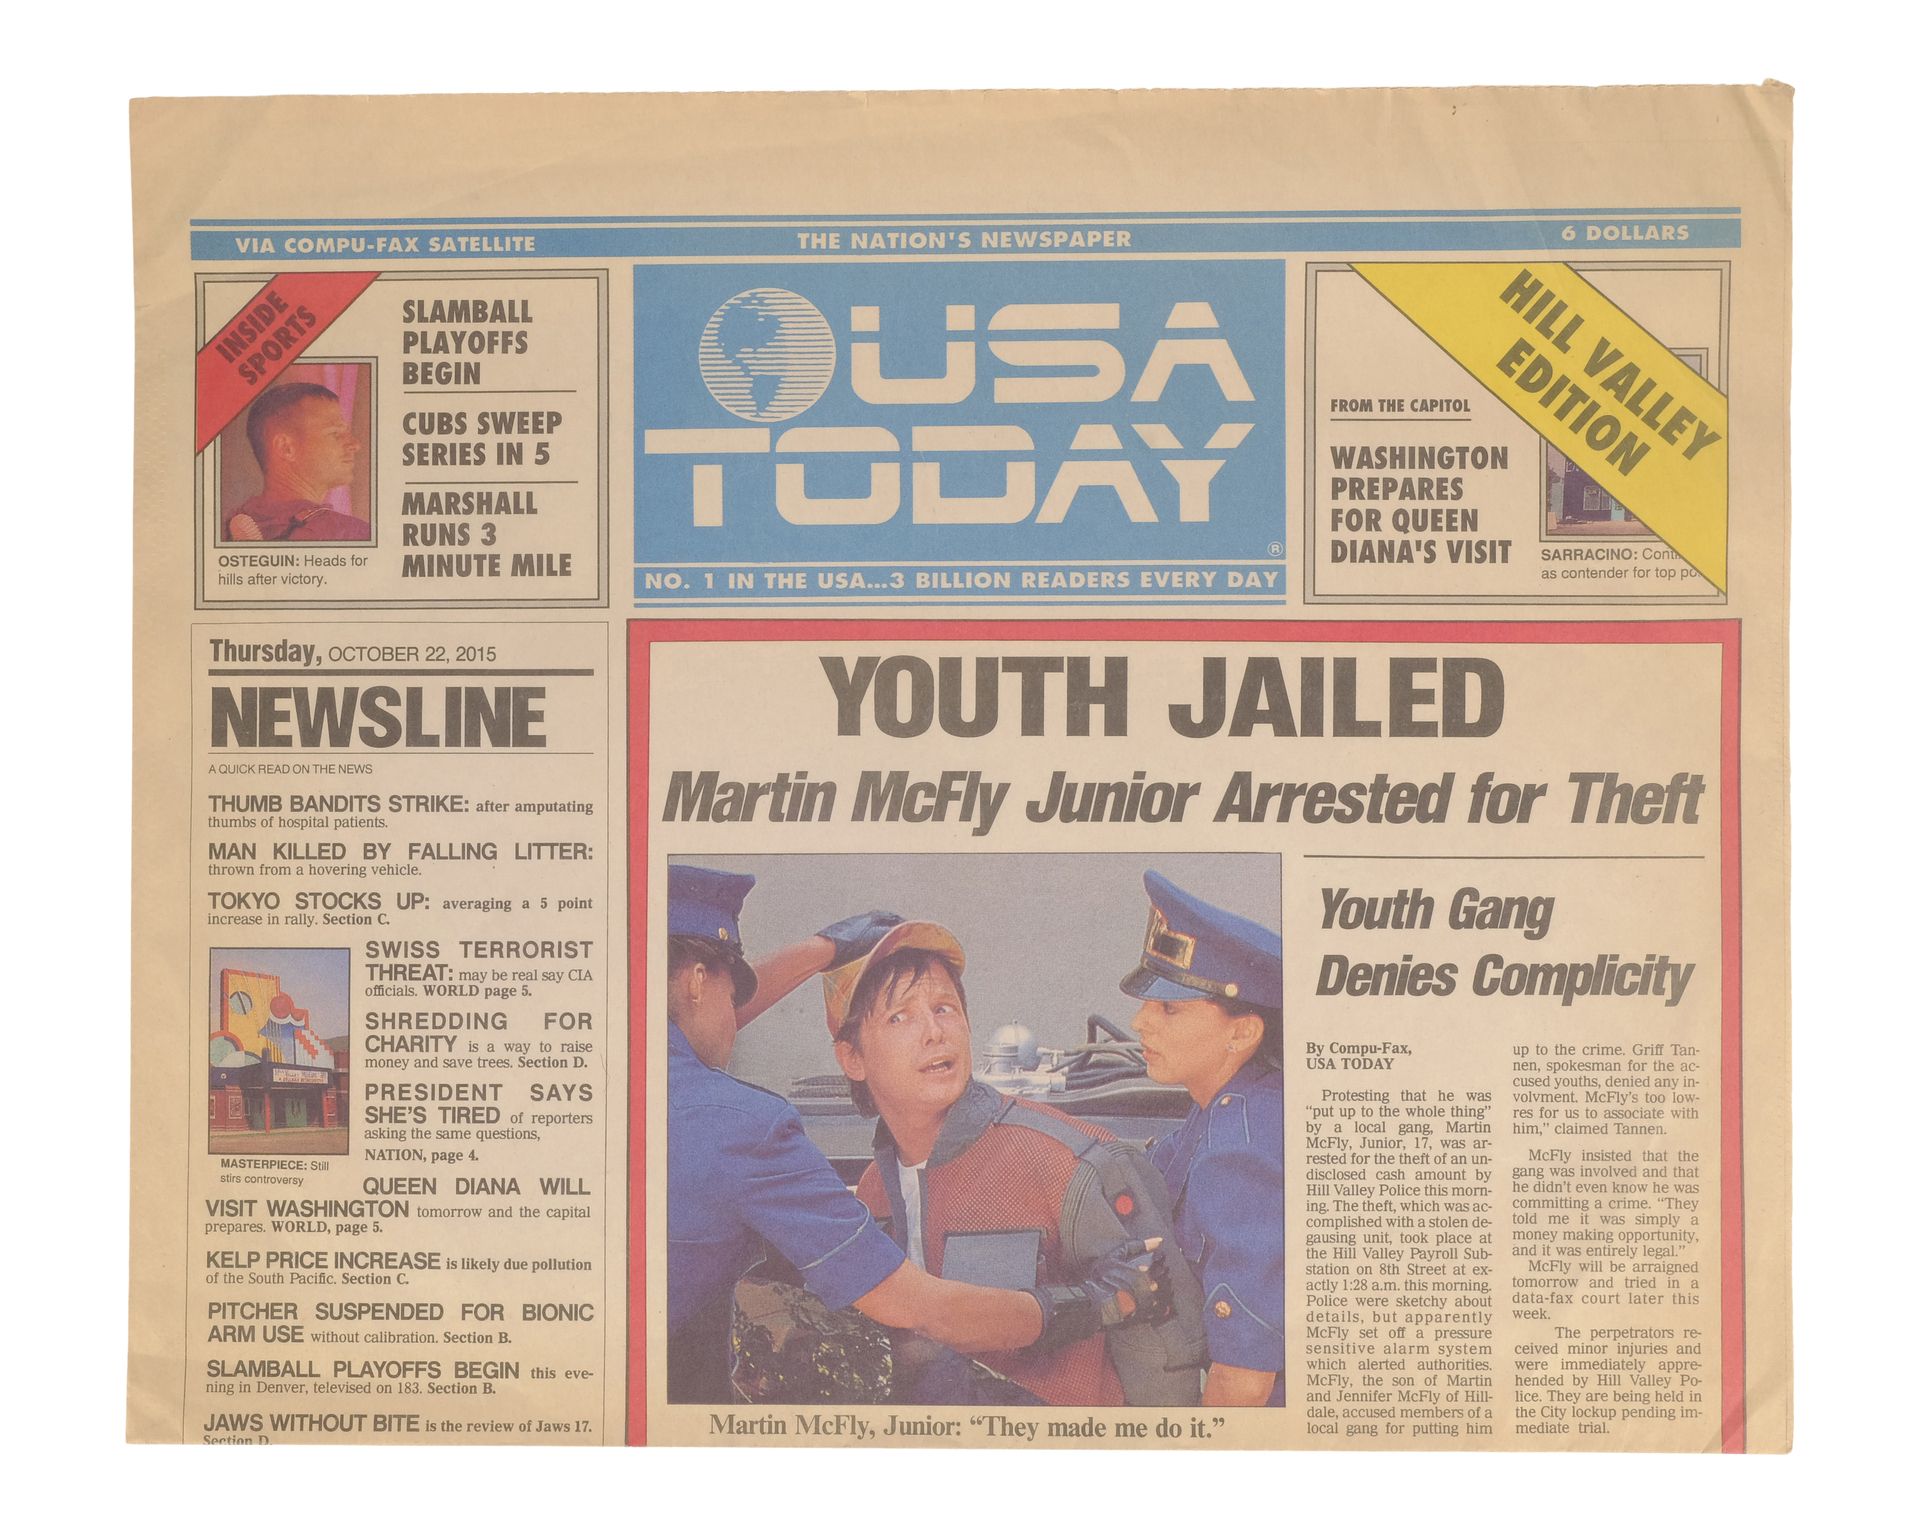 BACK TO THE FUTURE PART II (1989) - "Youth Jailed" USA Today Newspaper Cover